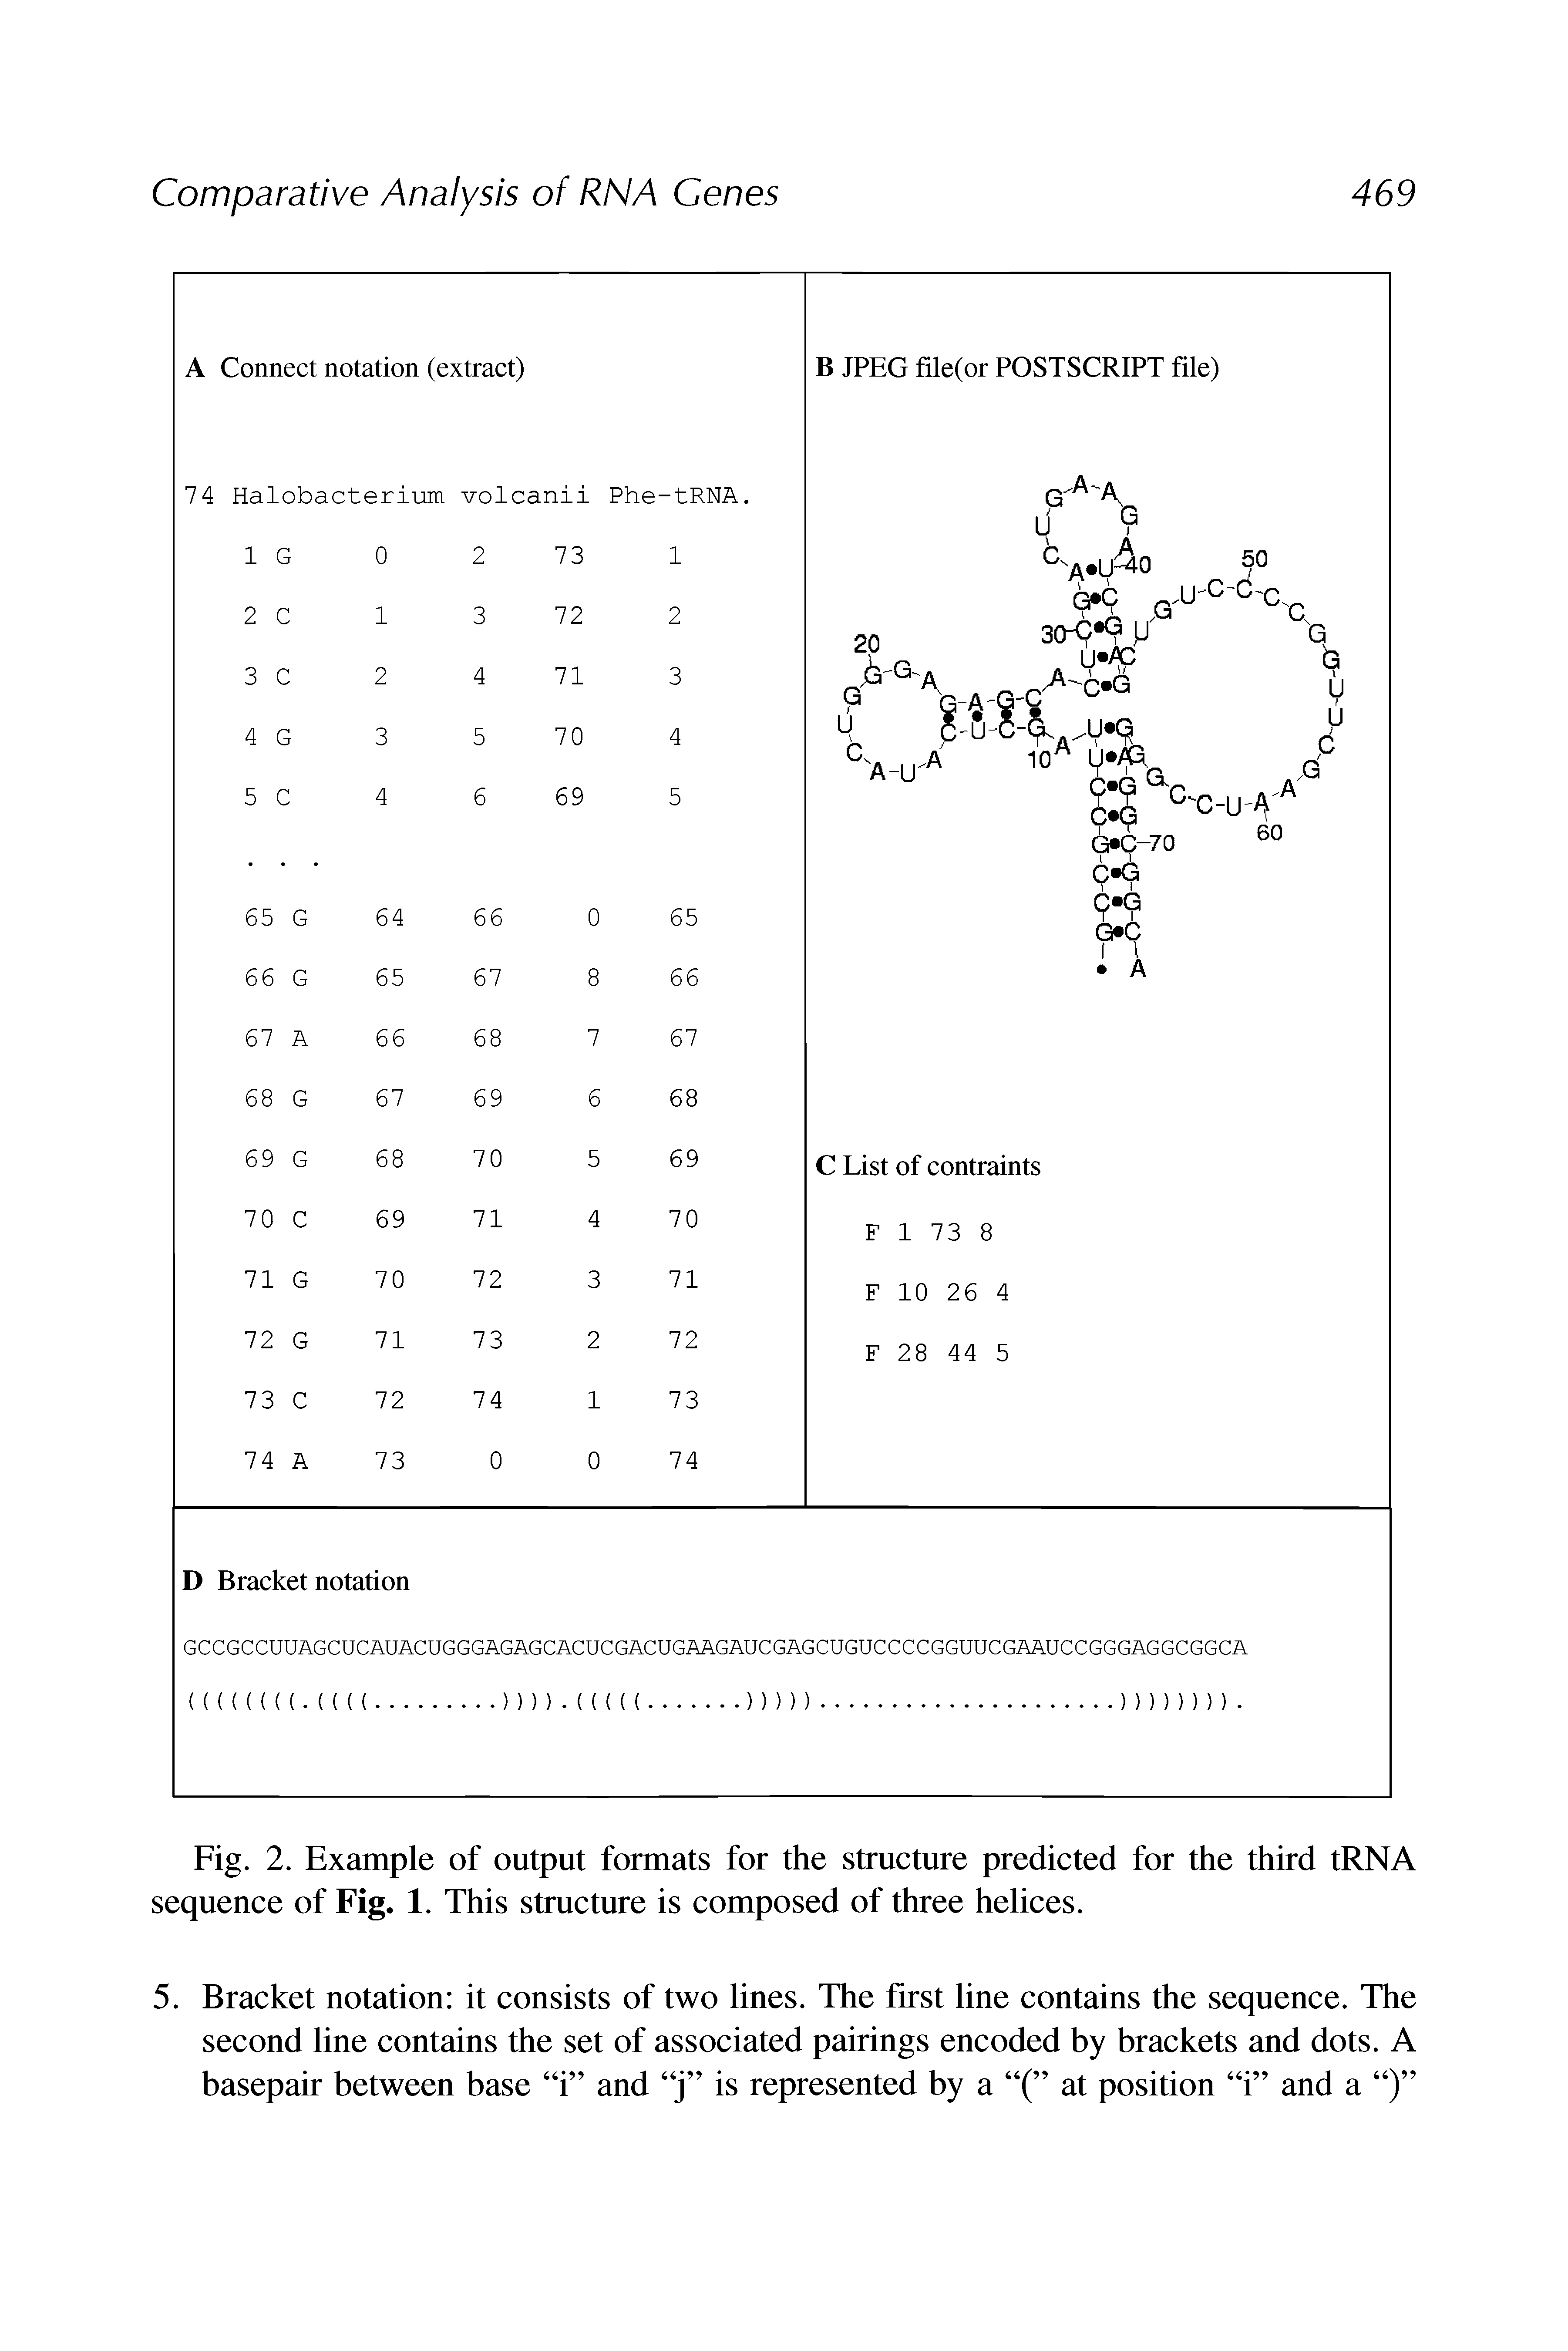 Fig. 2. Example of output formats for the structure predicted for the third tRNA sequence of Fig. 1. This structure is composed of three helices.